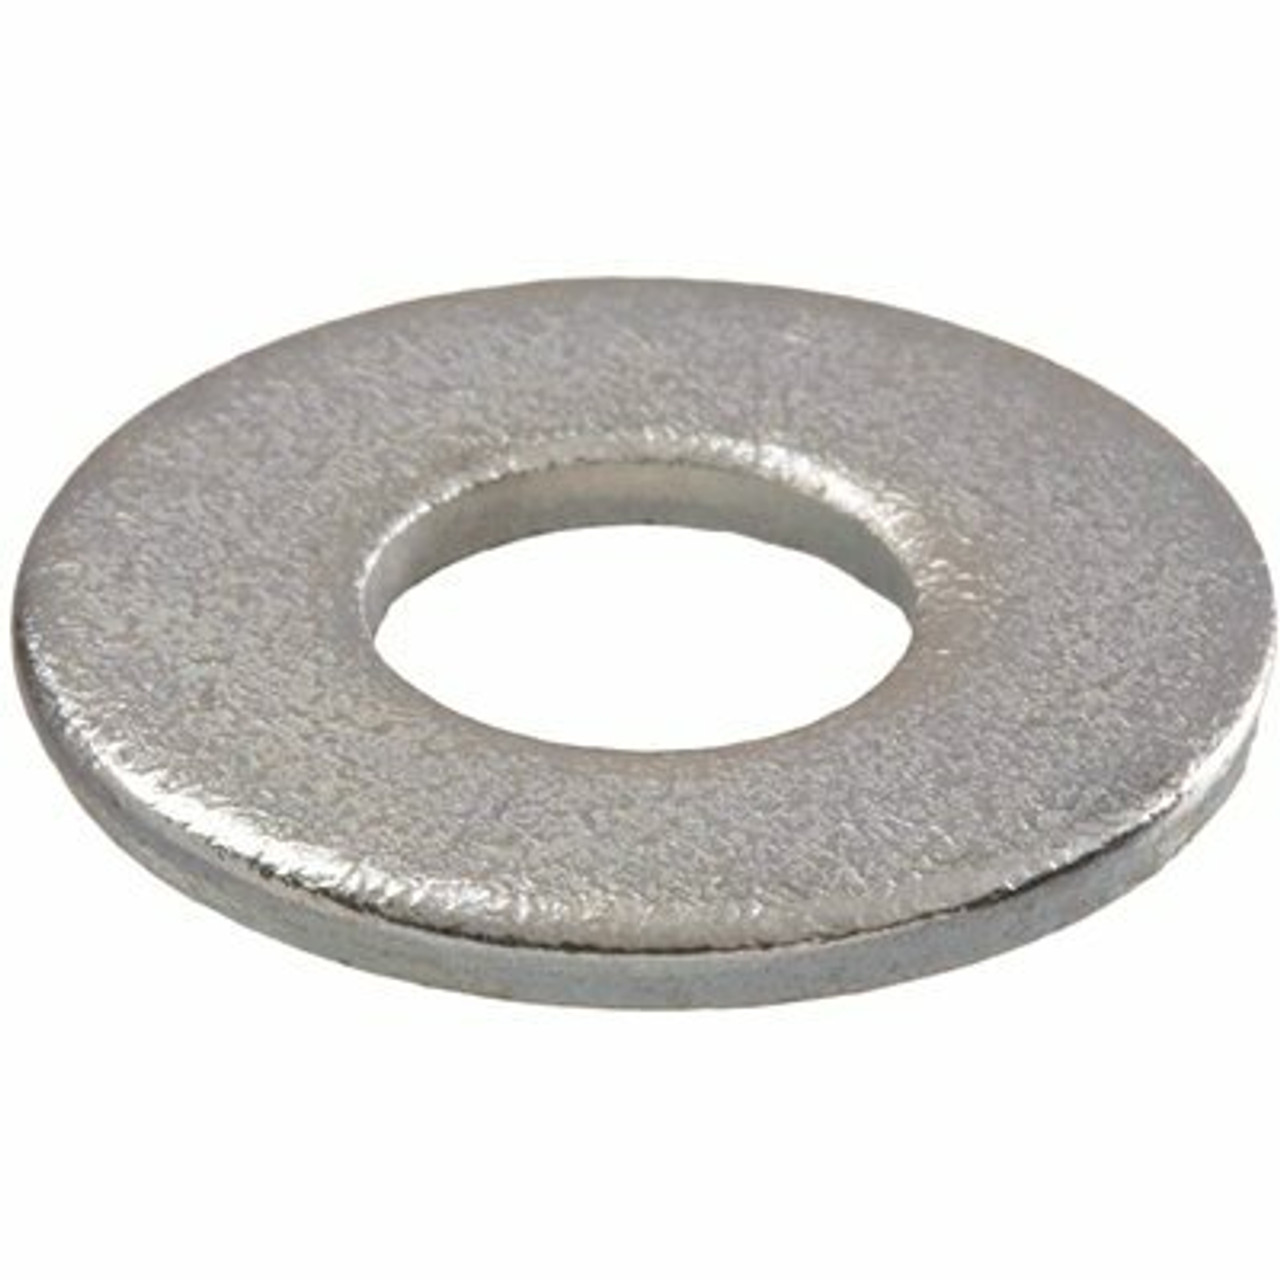 5/16 In. Uss Grade 2 Zinc Plated Flat Washers (250 Per Pack)